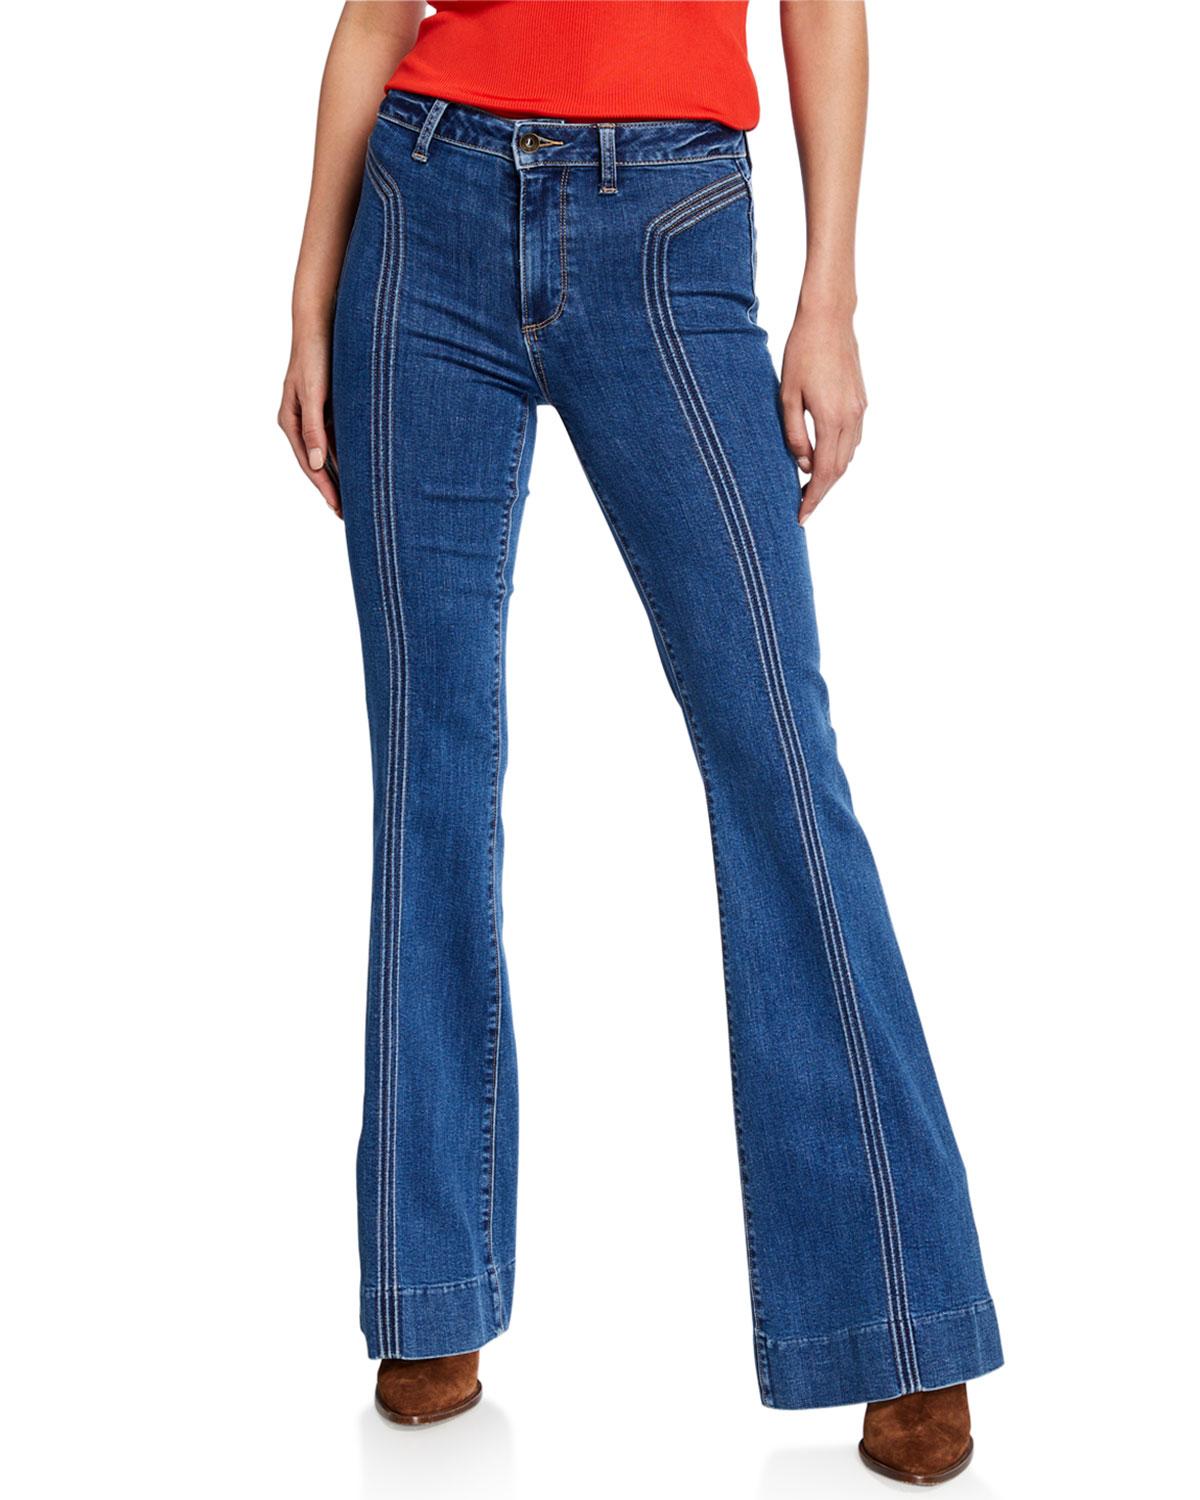 PAIGE Denim Genevieve High-rise Flare Jeans W/ Topstitching in Blue - Lyst